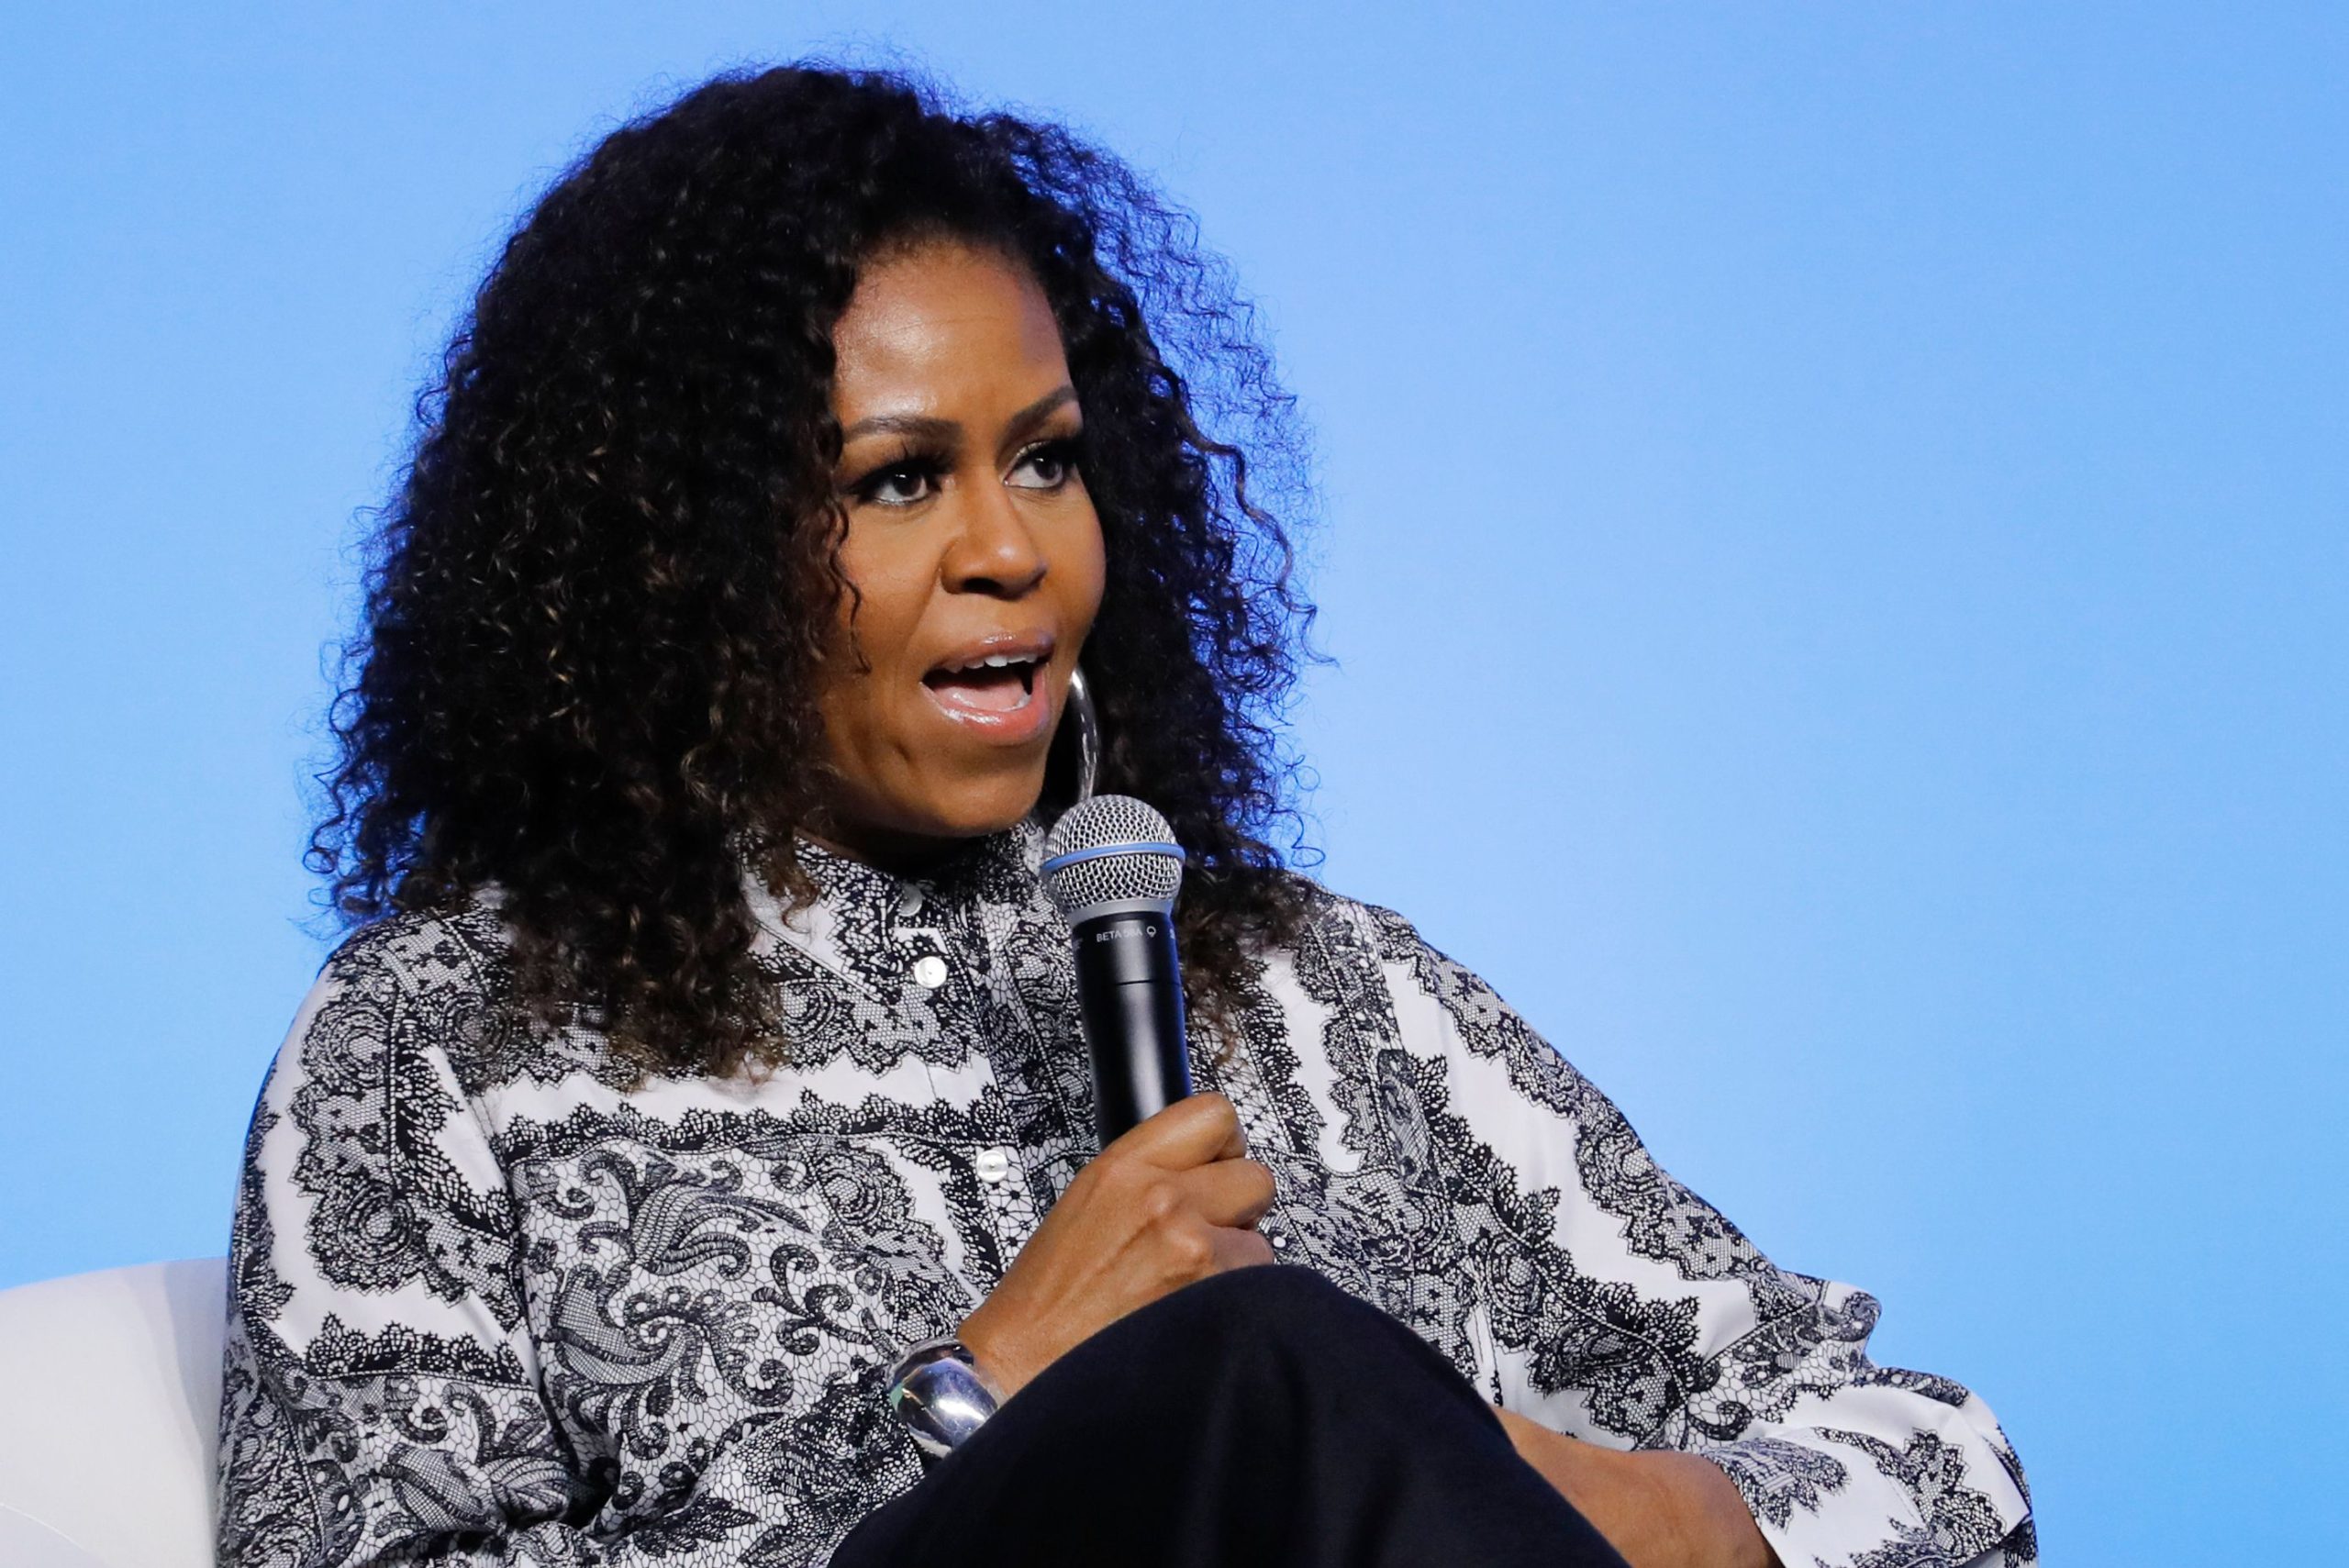 Michelle Obama Joins Forces With Babyface, Teddy Riley for Voter Registration Initiative